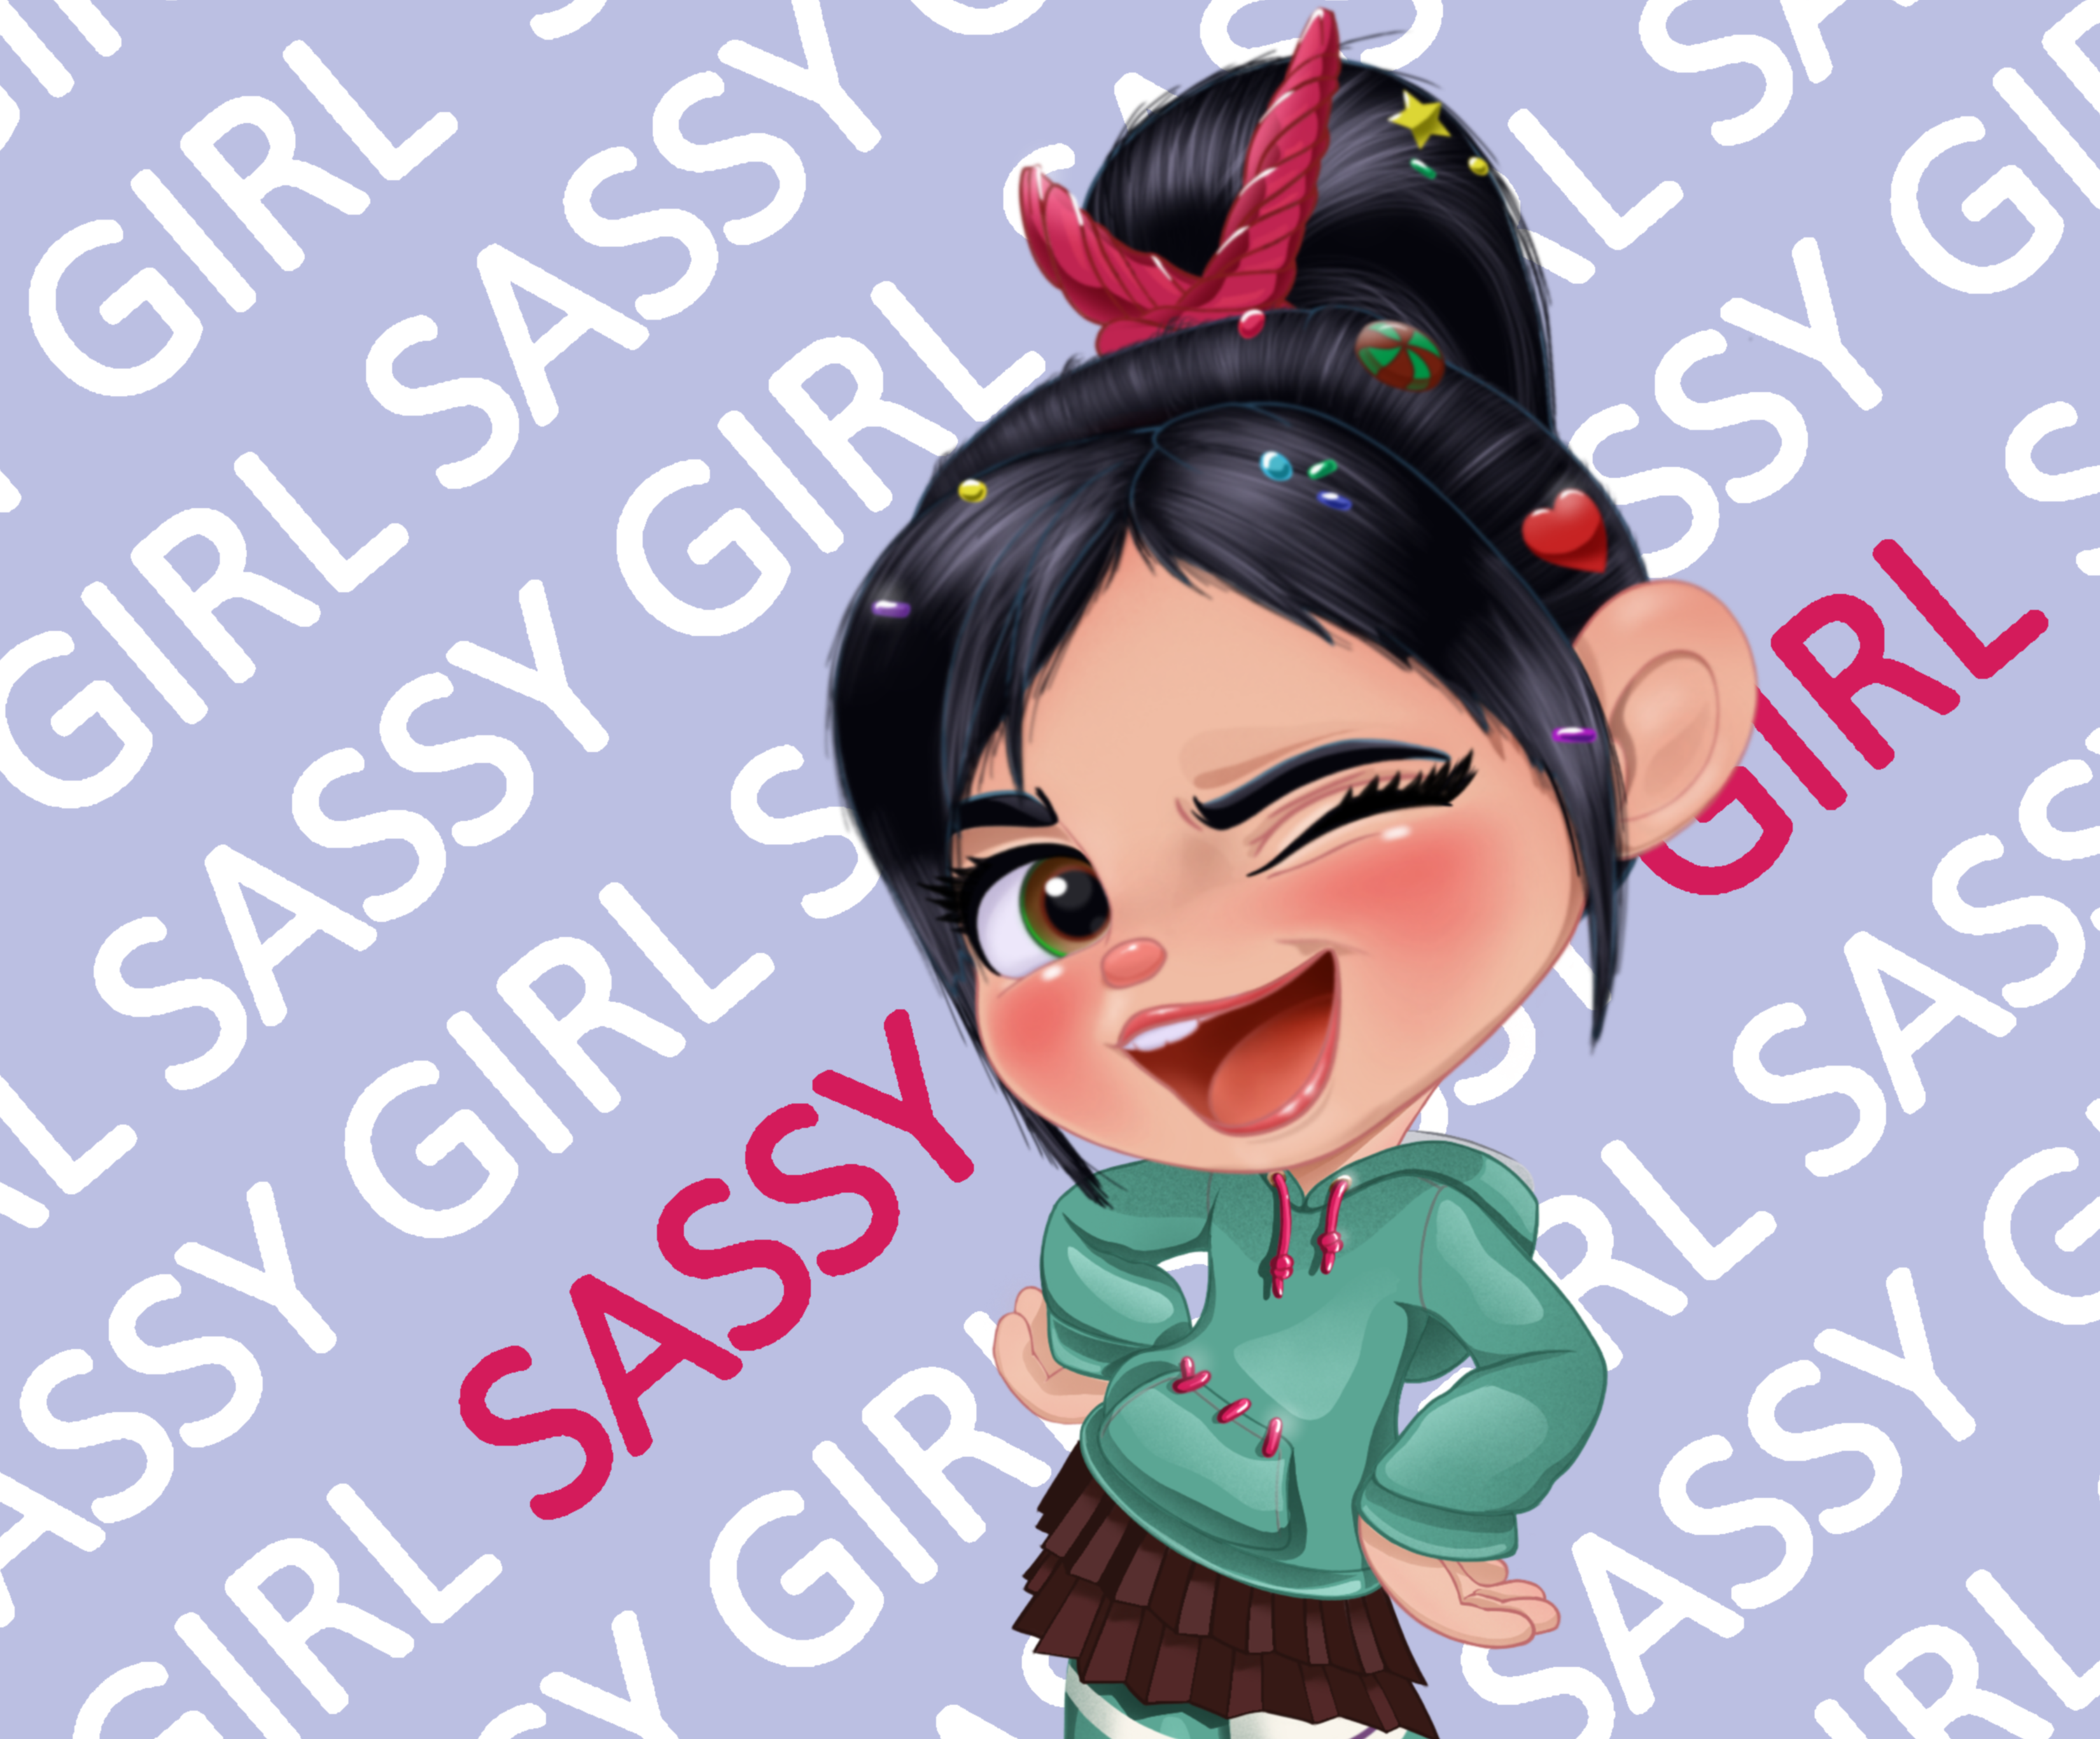 Sassy girl pictures